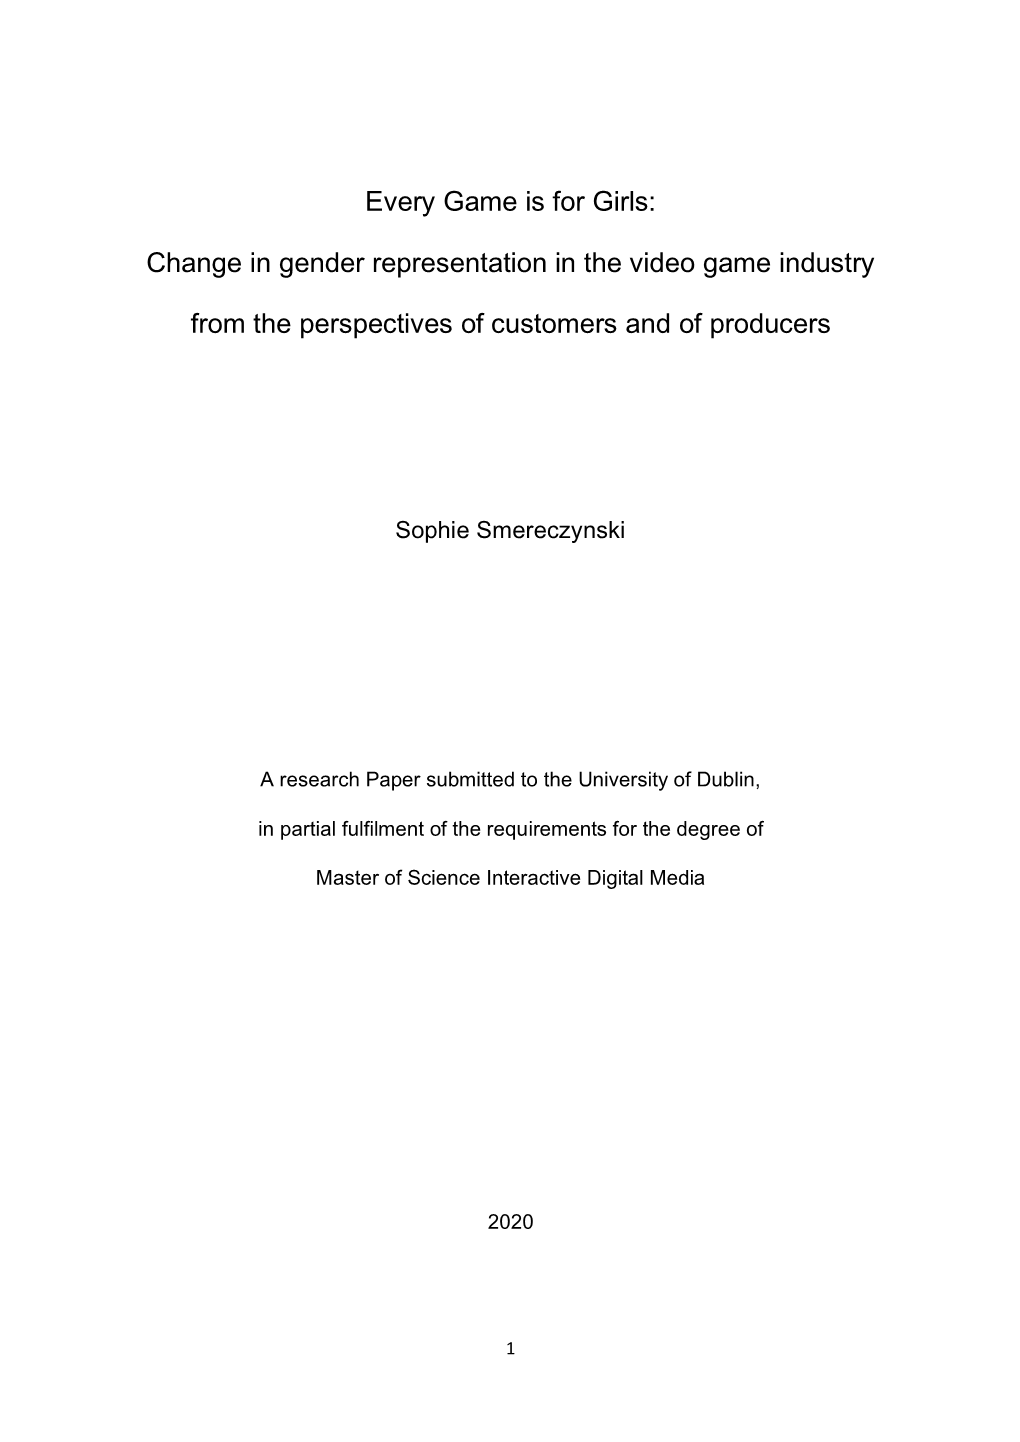 Change in Gender Representation in the Video Game Industry from The